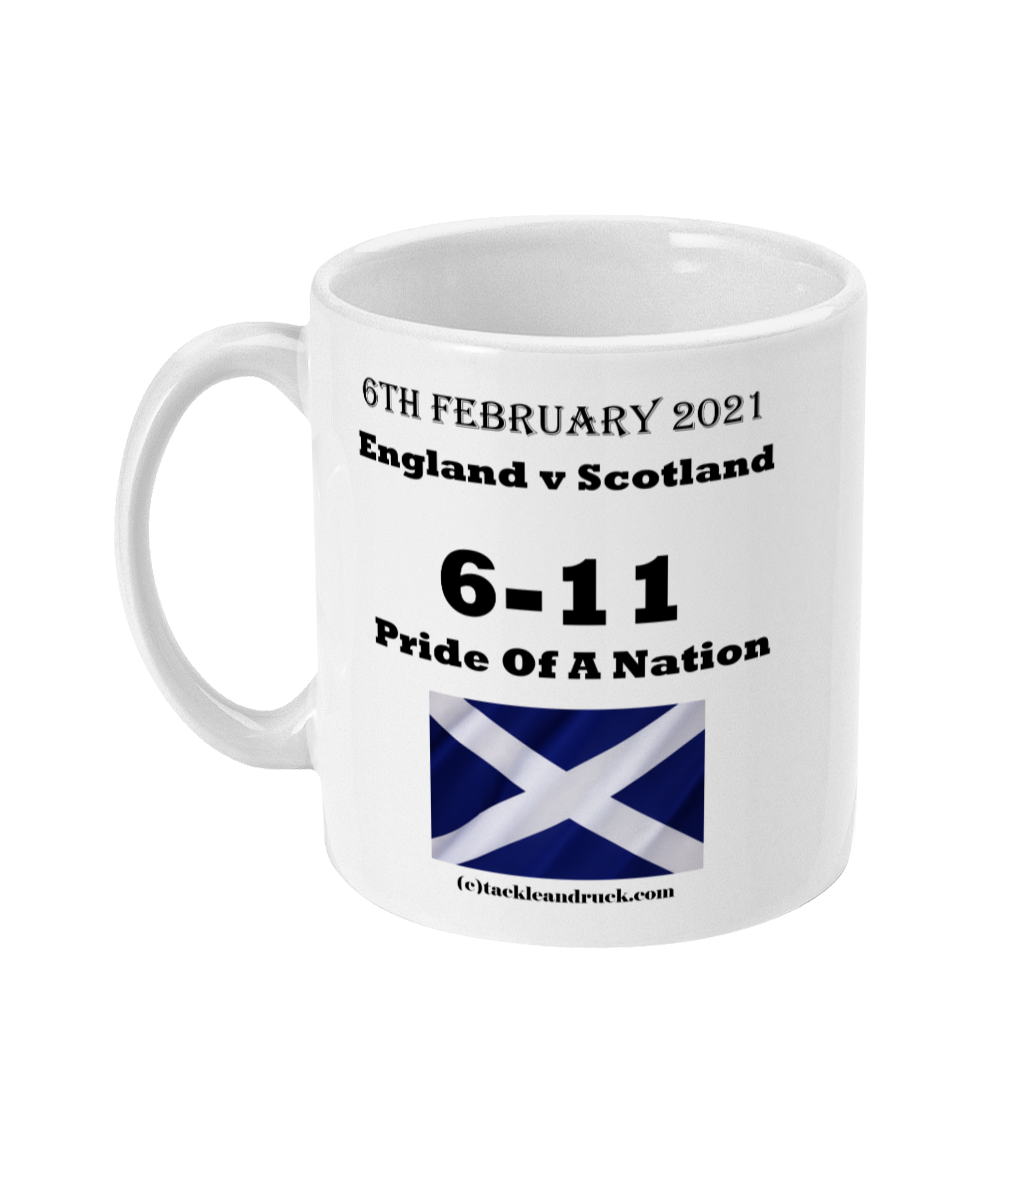 Tackle and Ruck - Calcutta Cup 2021 Win - Pride Of A Nation15oz souvenir mugs gifts Scottish Rugby mugs